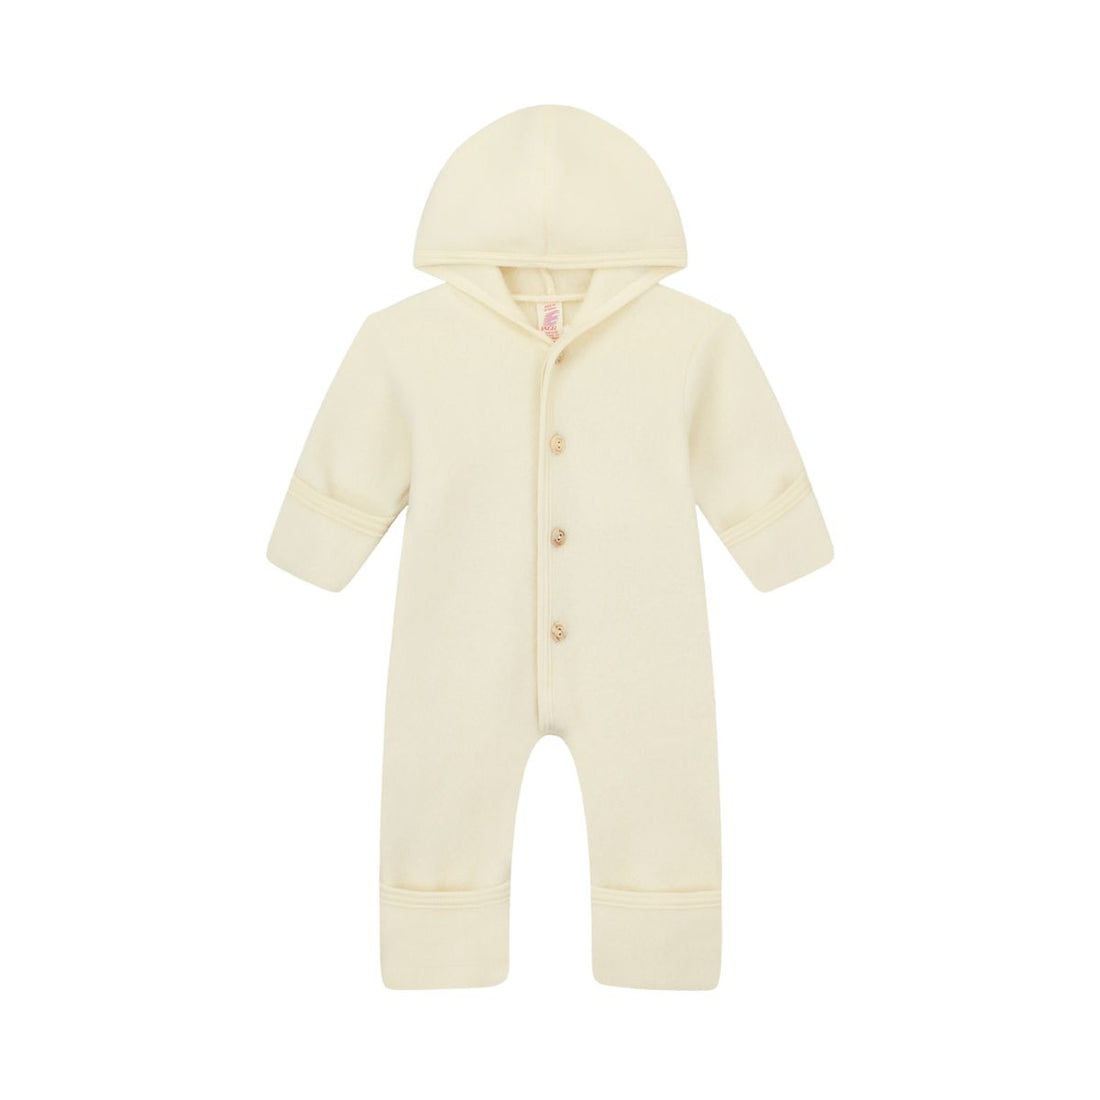 Merino Wool Baby Overall Natural Engel Natur The Archive Store